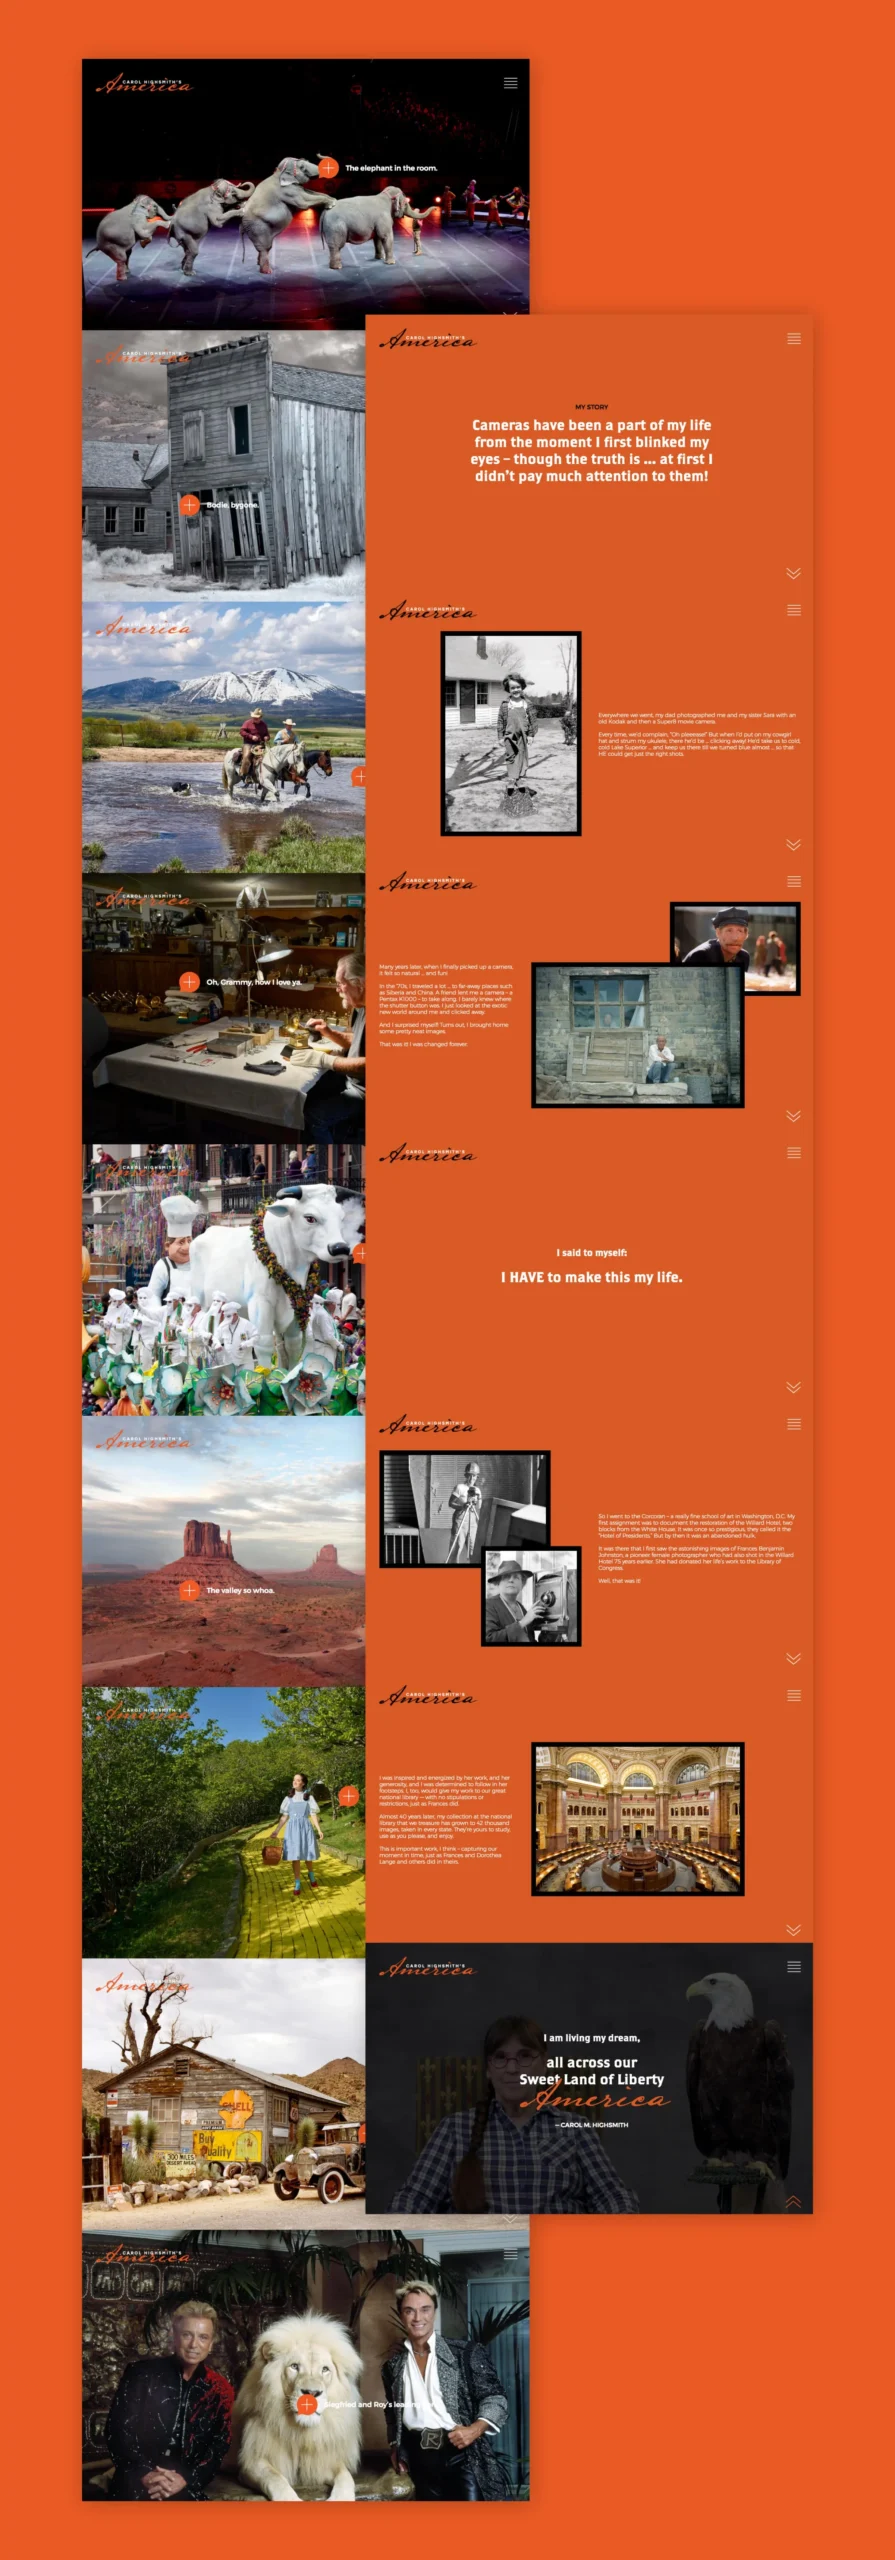 Sample pages from the Carol Highsmith’s America website shown overlapping, in desktop view